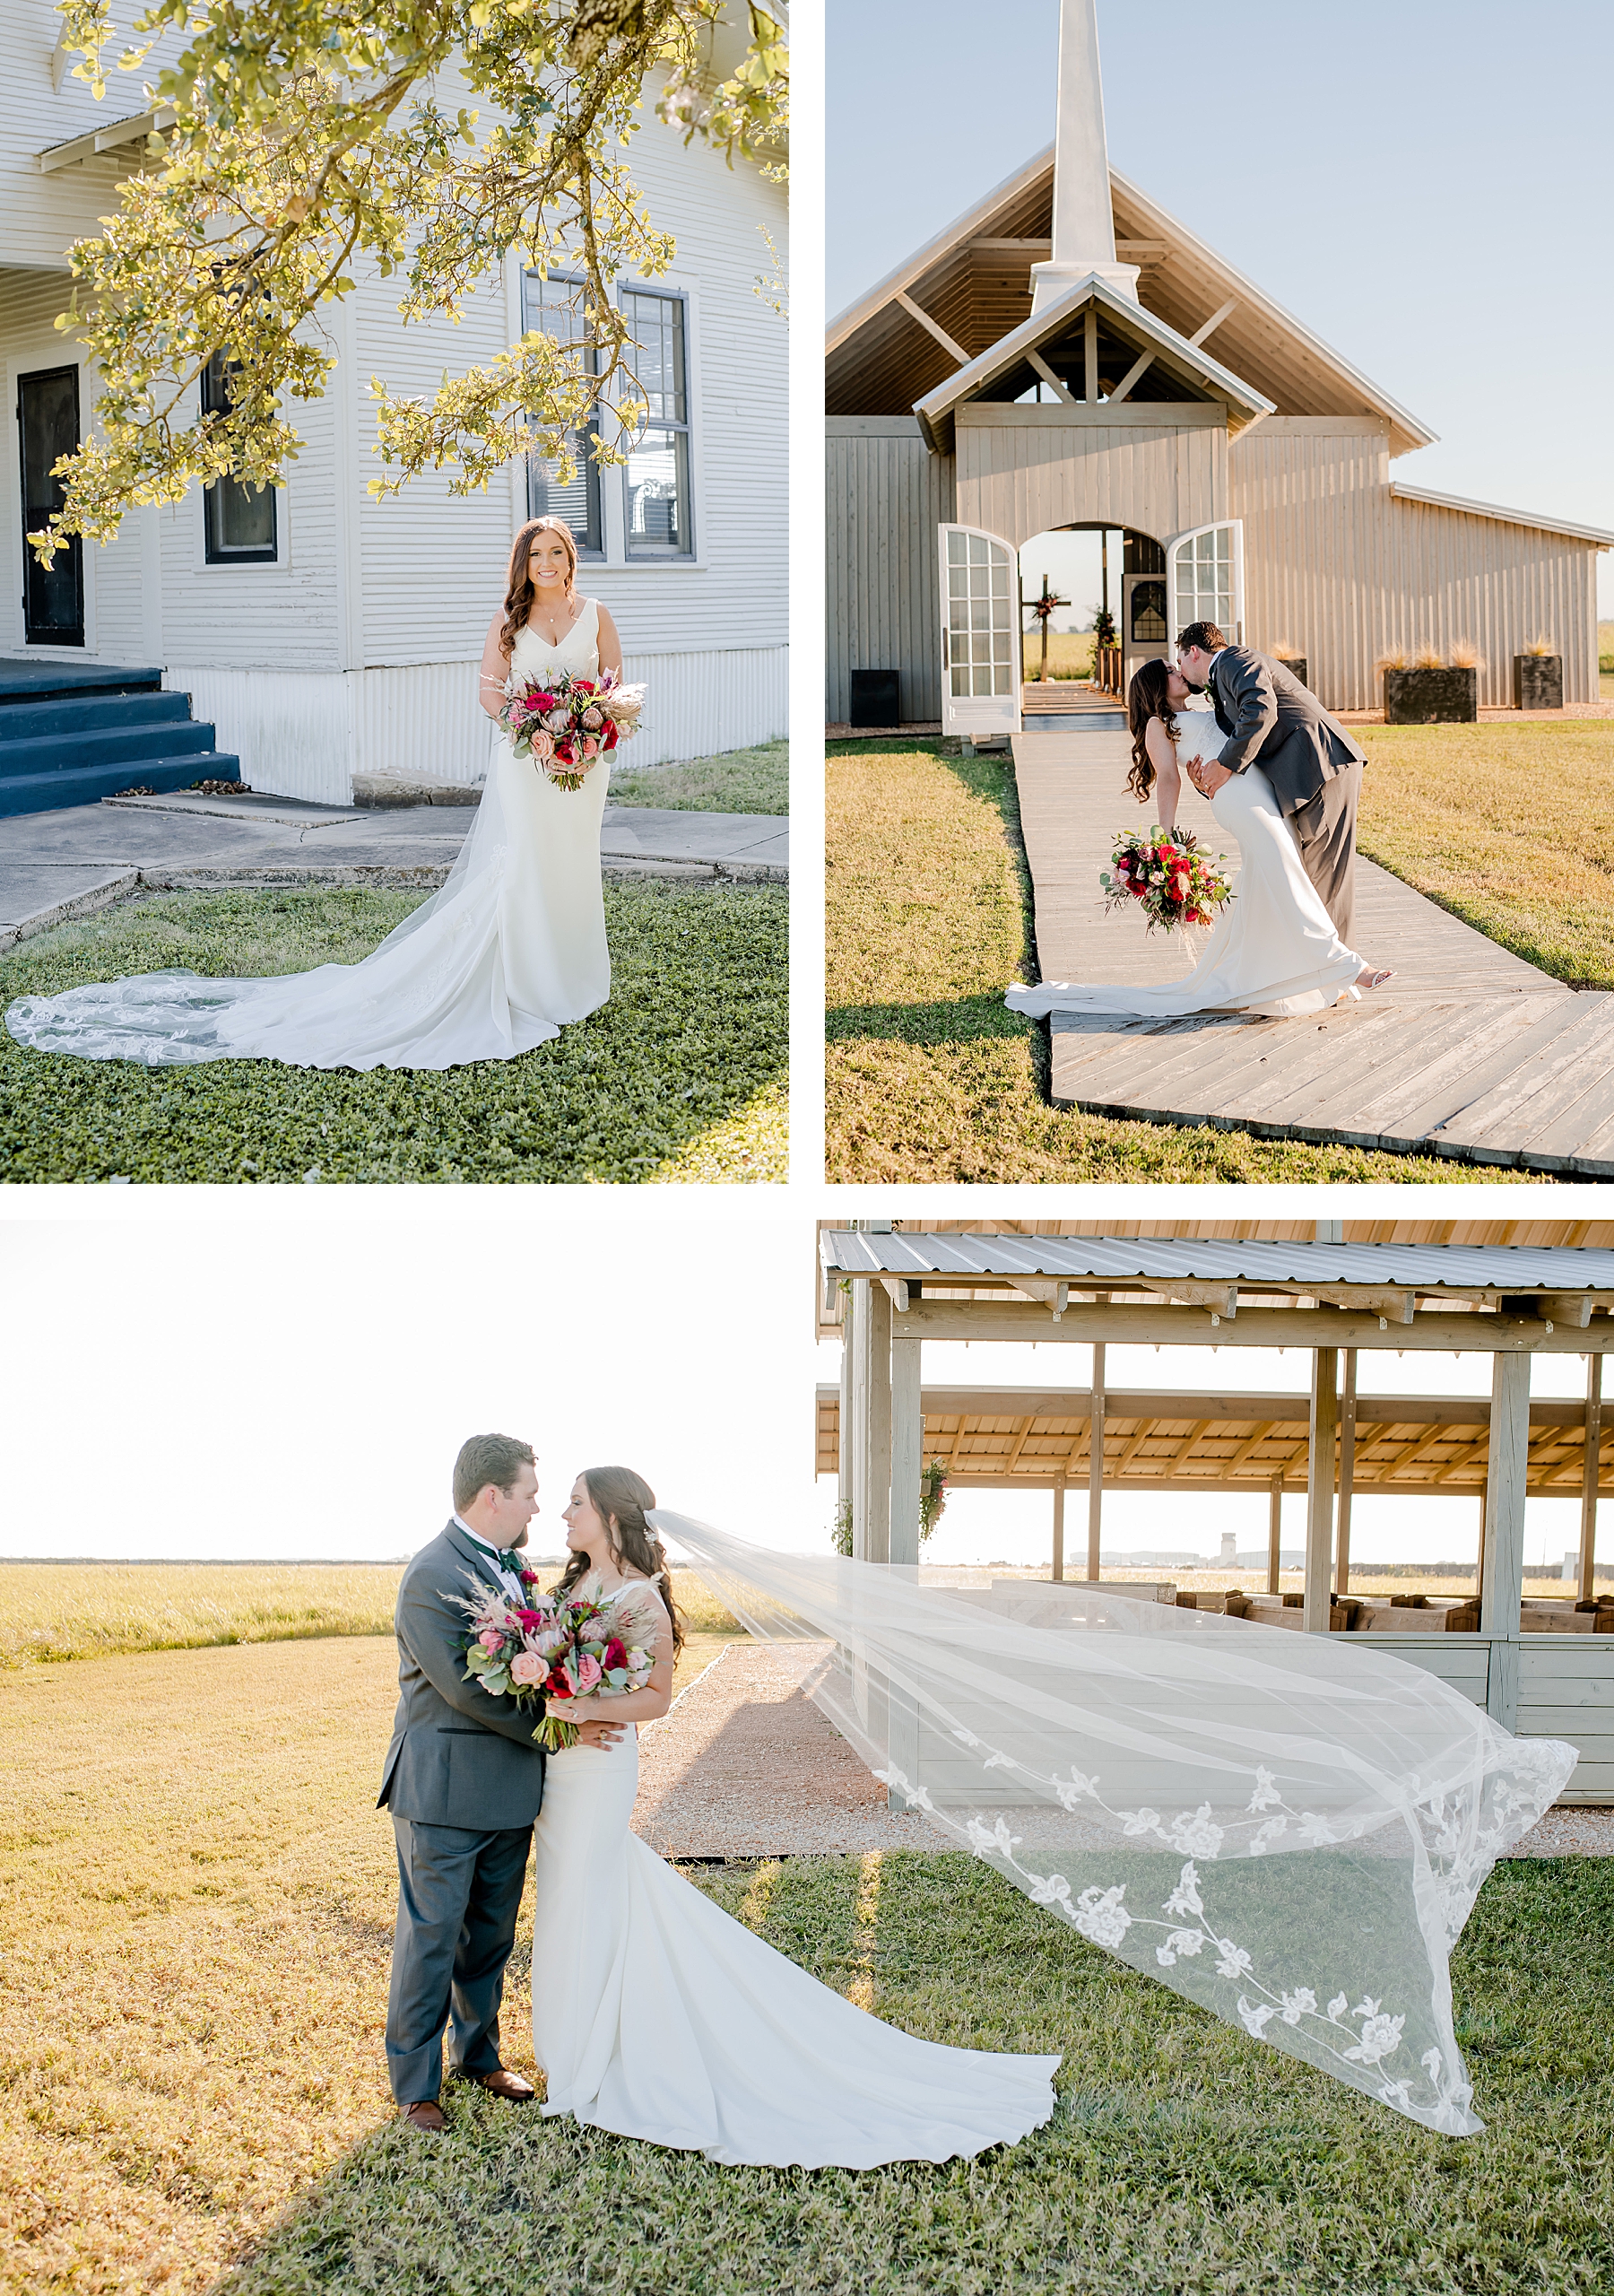 Emerald Green Fall Wedding at The Allen Farmhaus in New Braunfels, Texas | Reiley and Rose | Central Texas Floral Designer